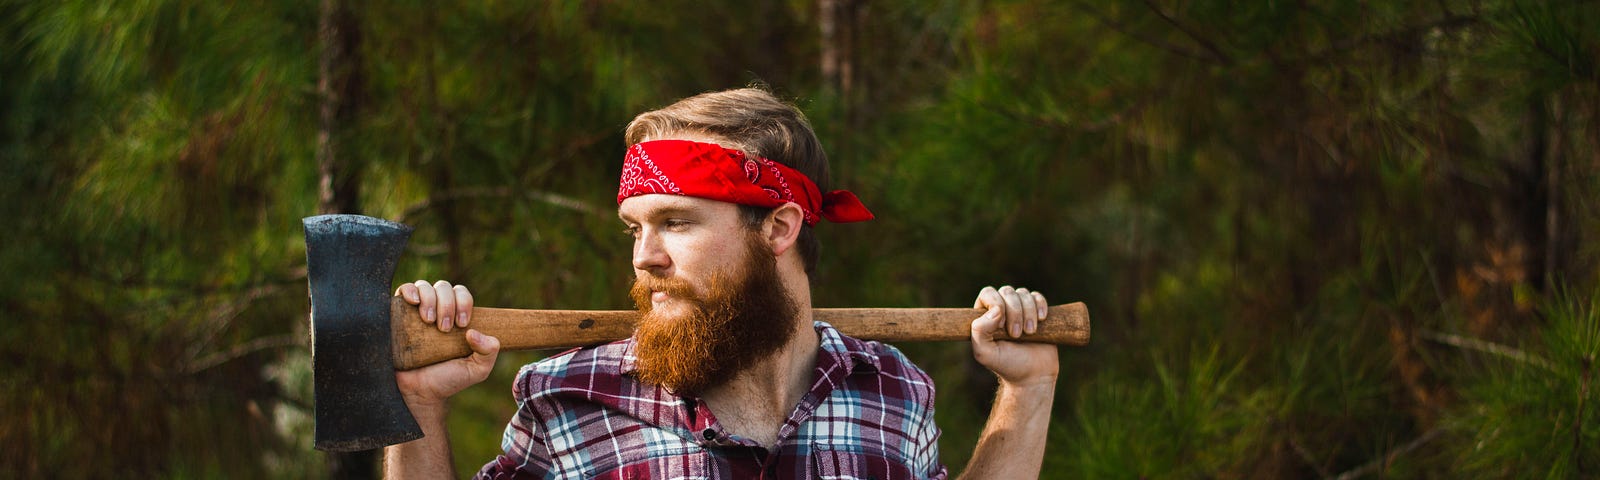 A lumberjack in a plaid shirt, with an axe over his shoulders